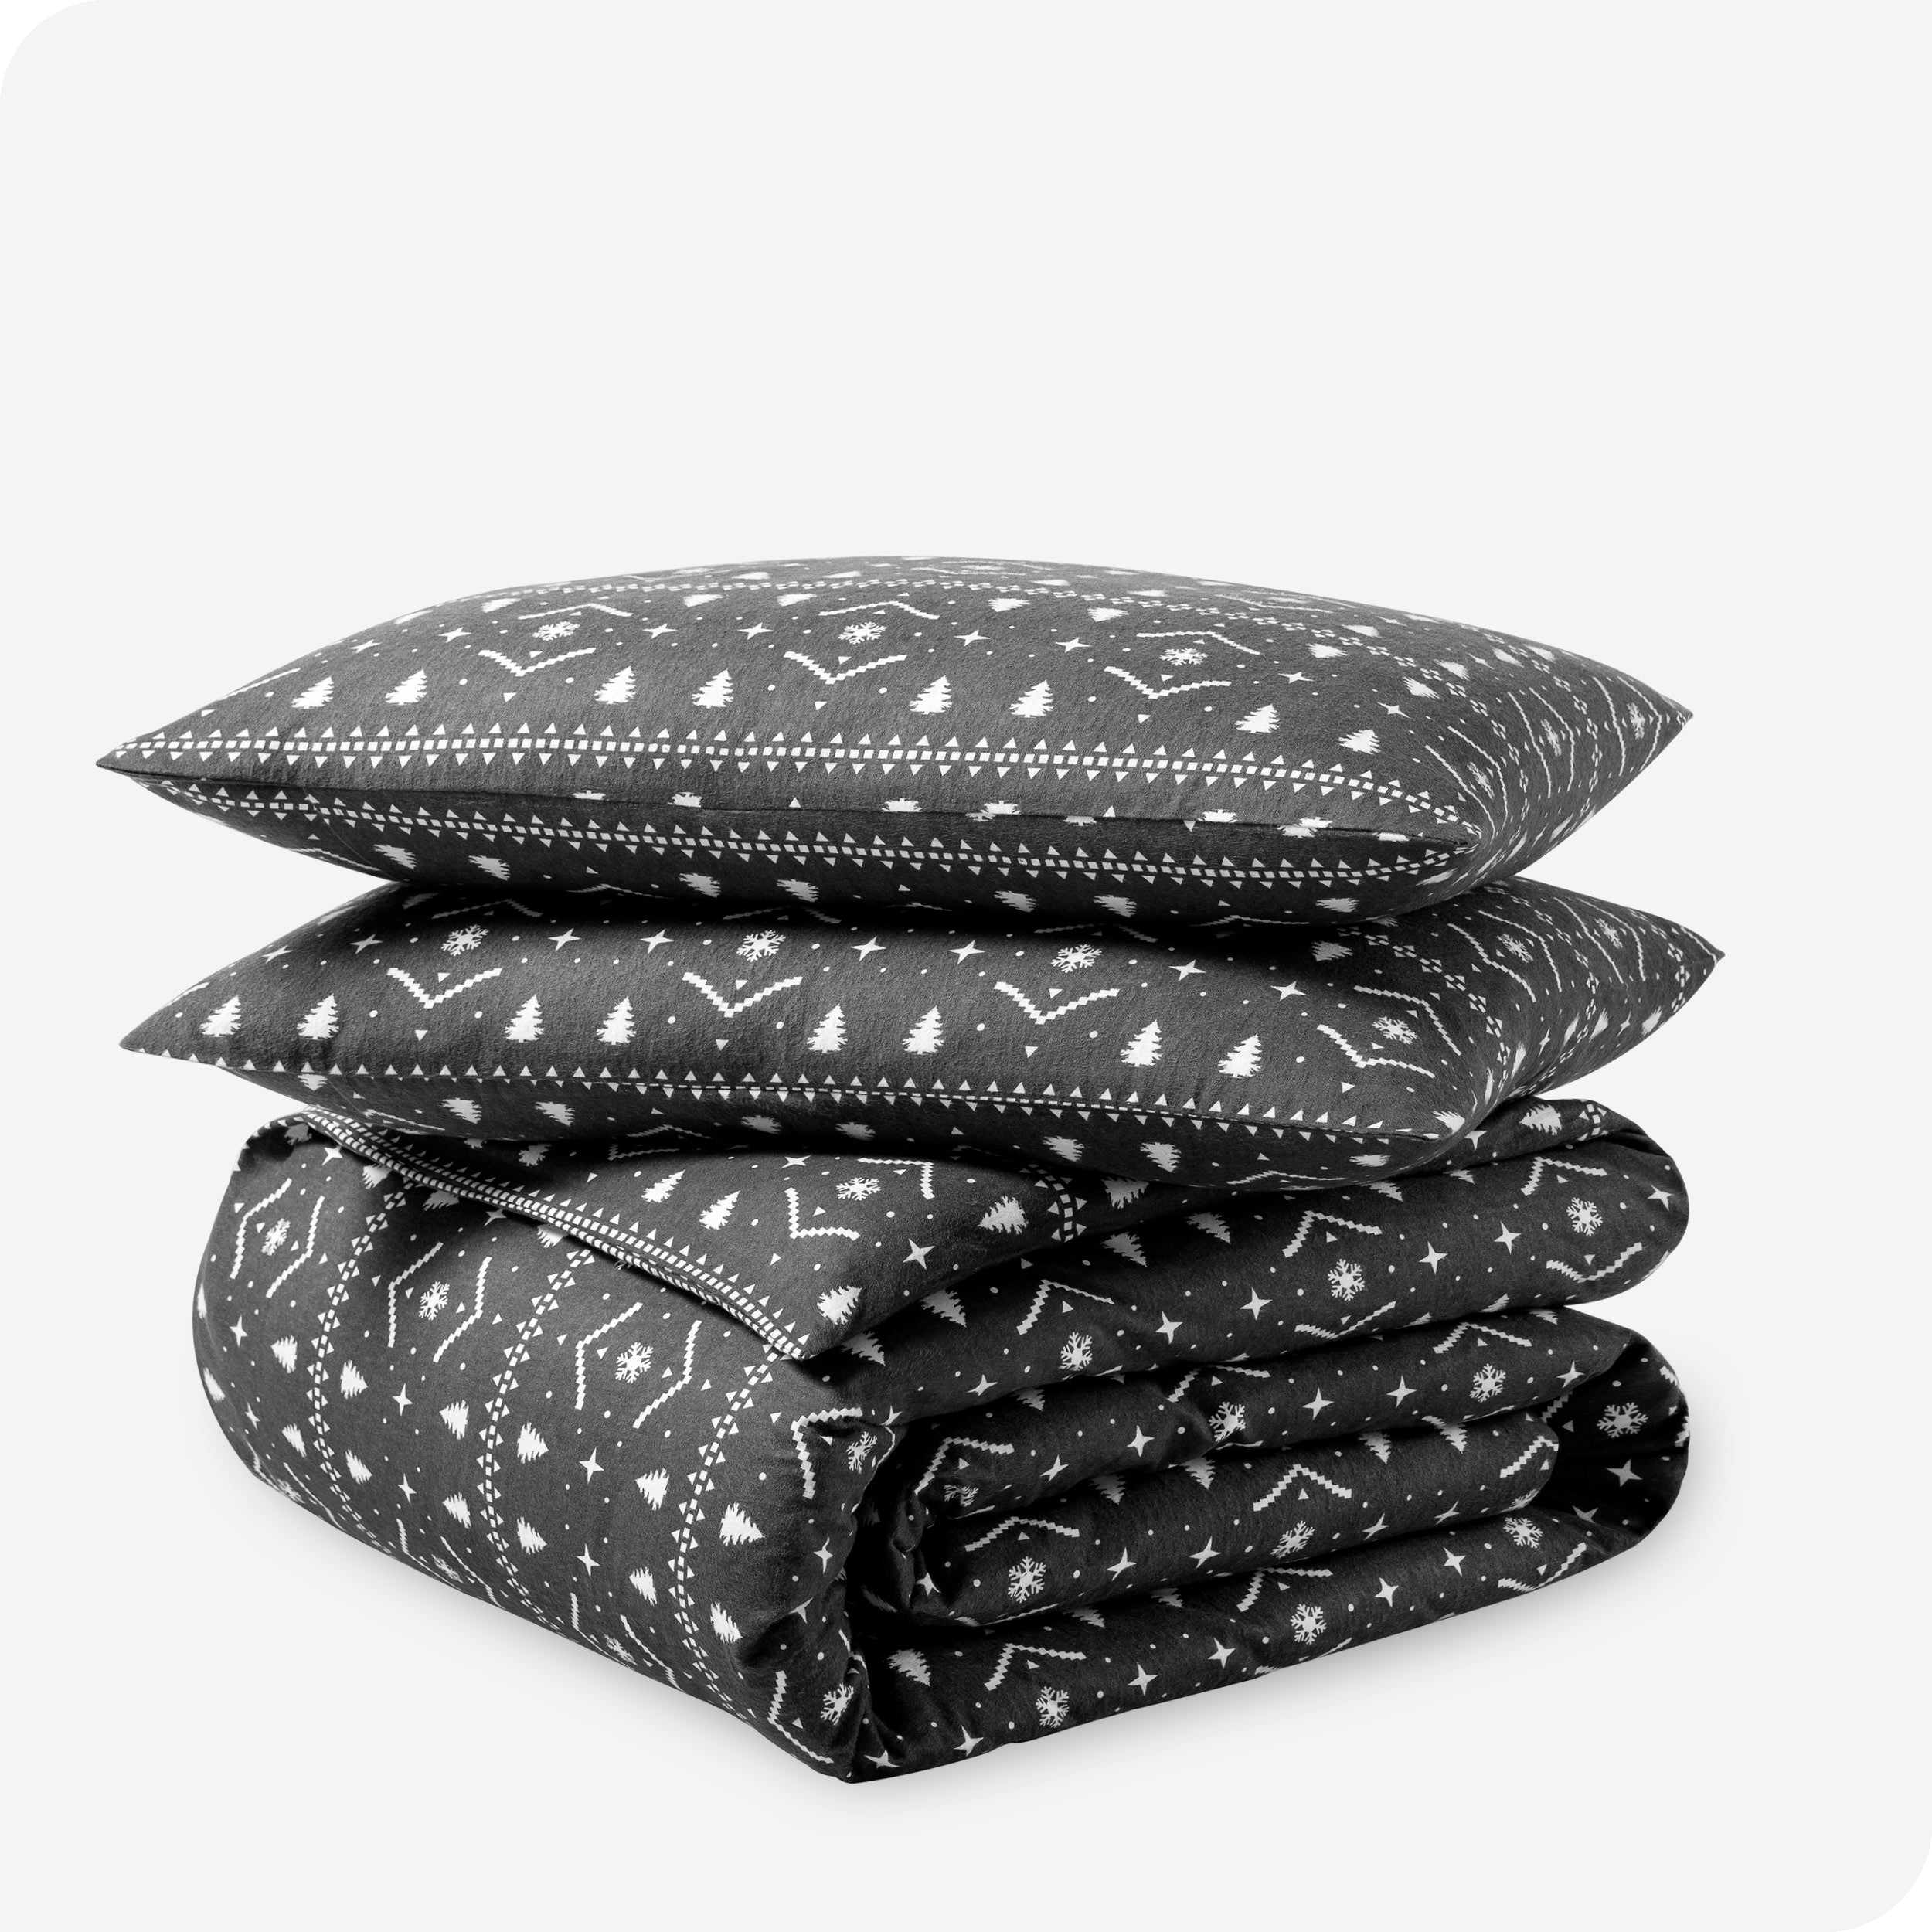 Winter alpine print duvet cover and sham set folded and stacked